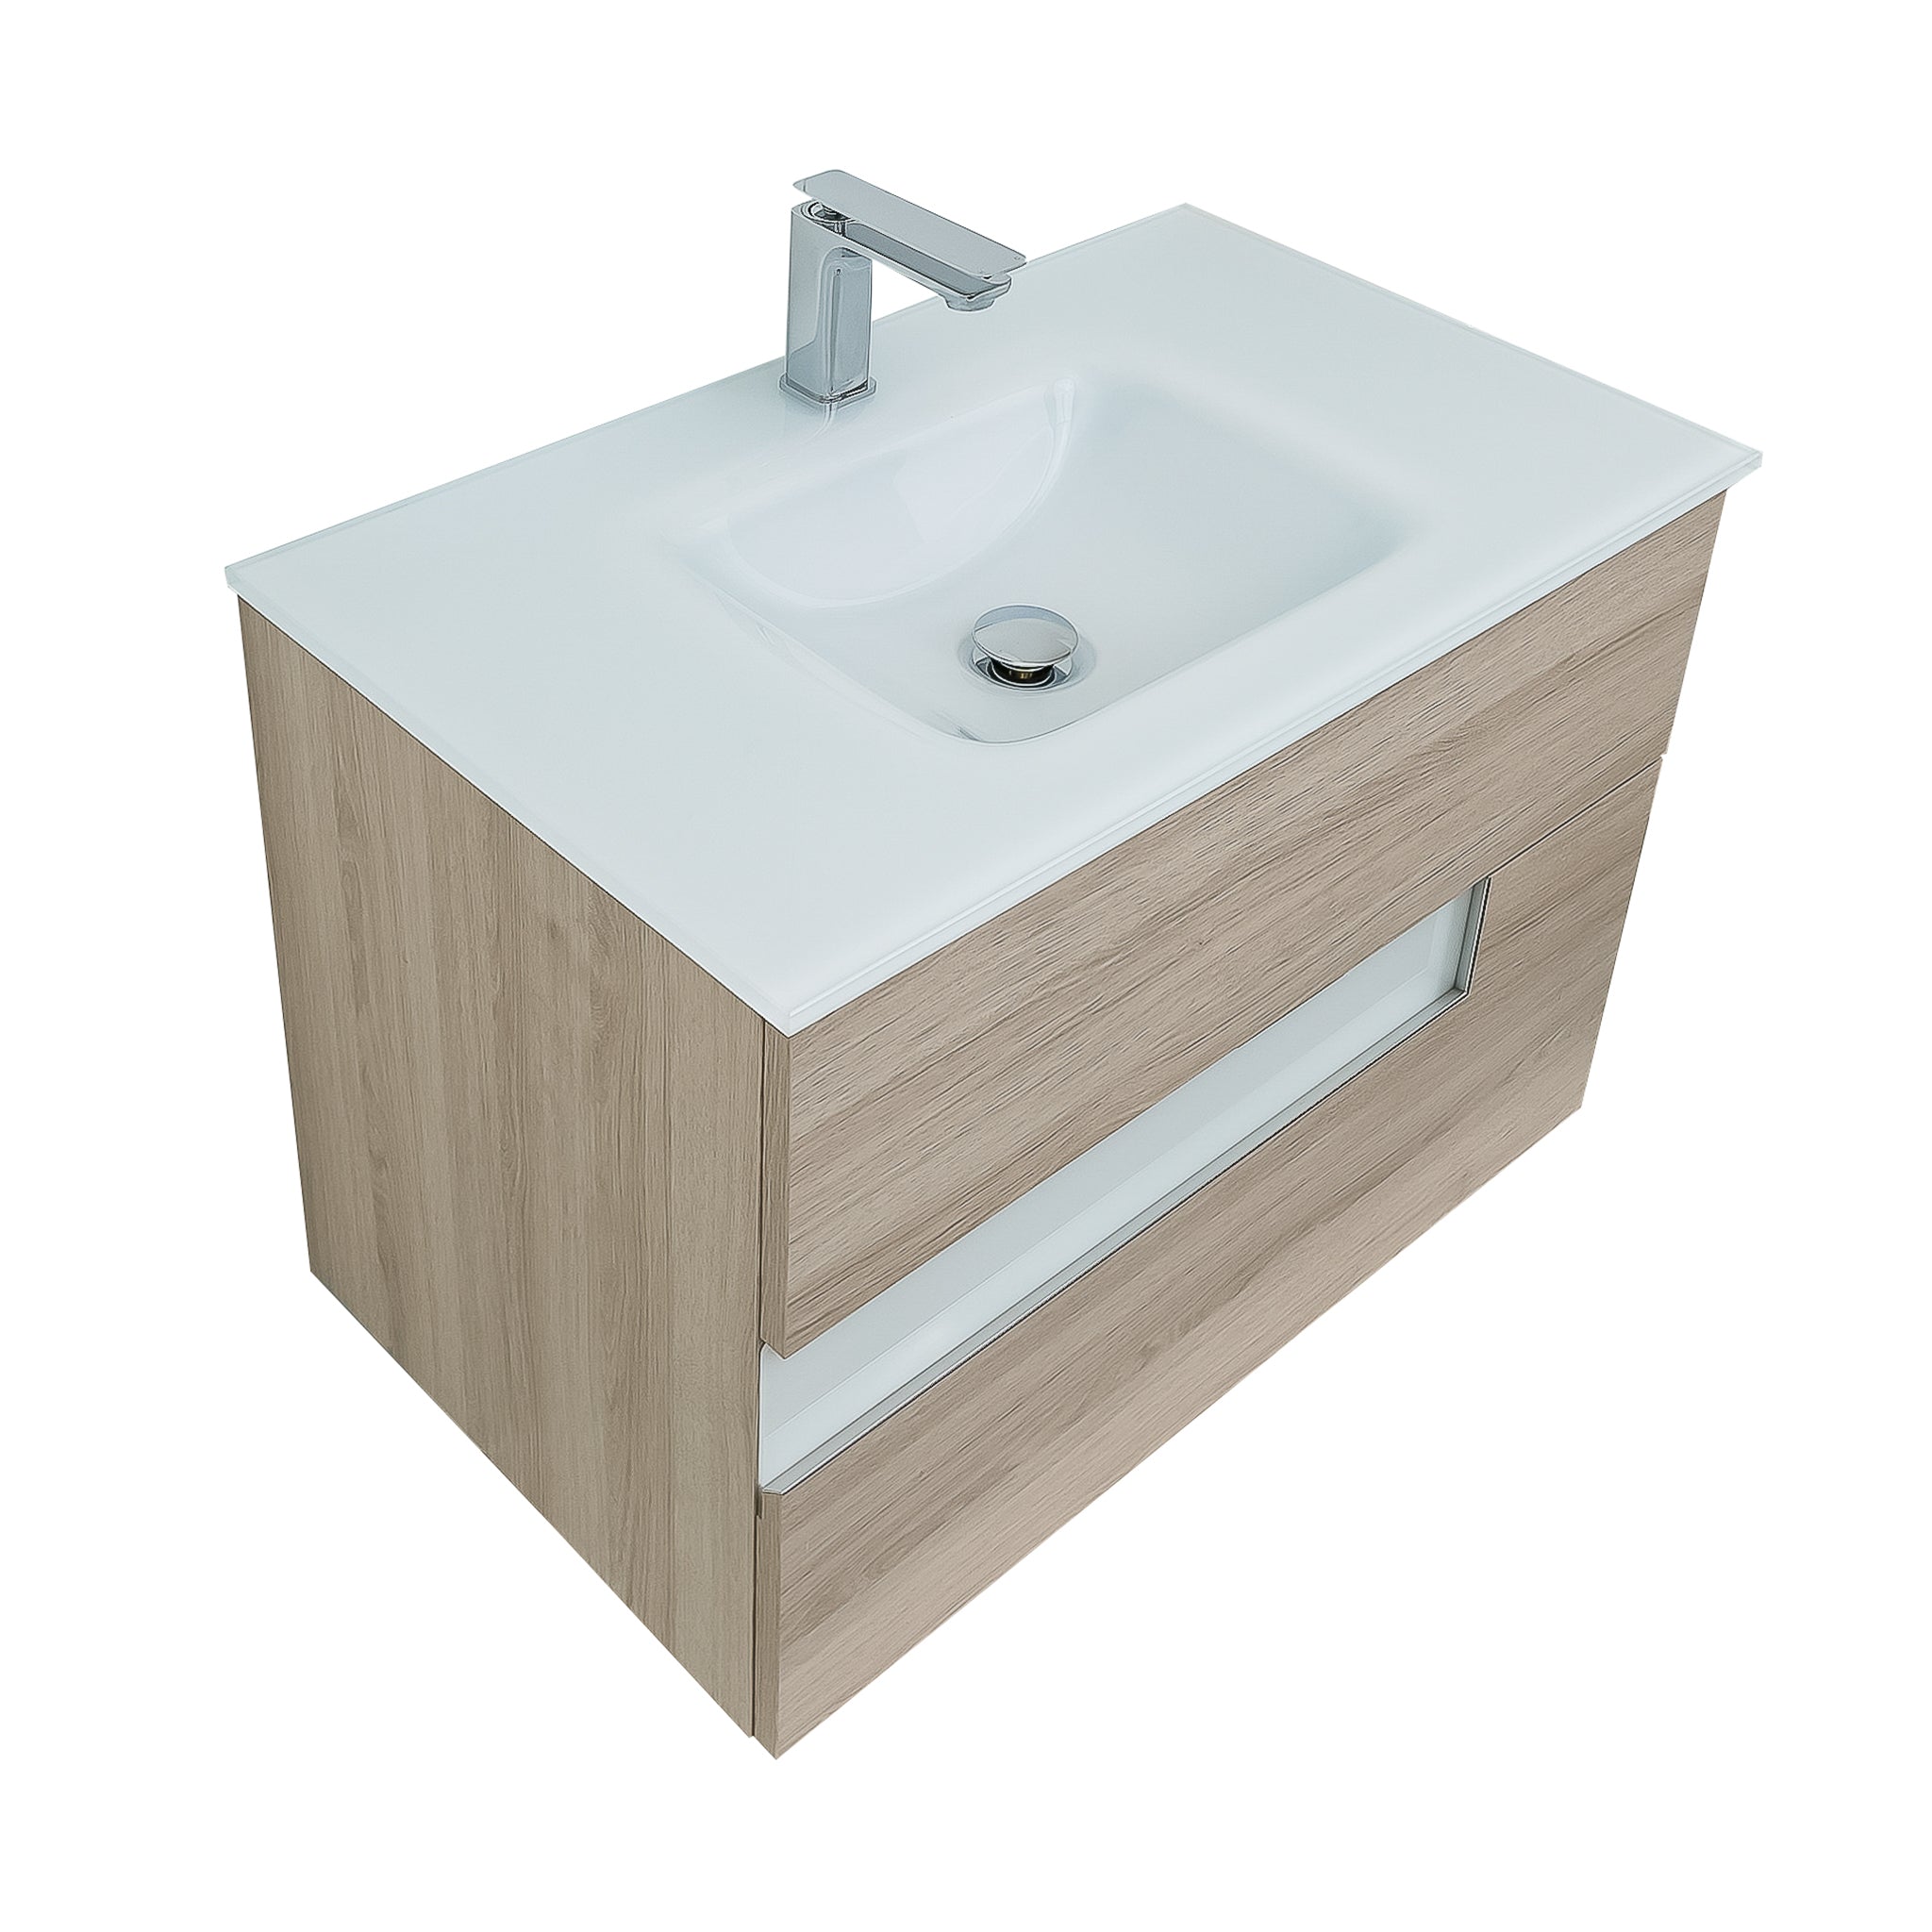 Vision 35.5 Natural Light Wood Cabinet, White Tempered Glass Sink, Wall Mounted Modern Vanity Set